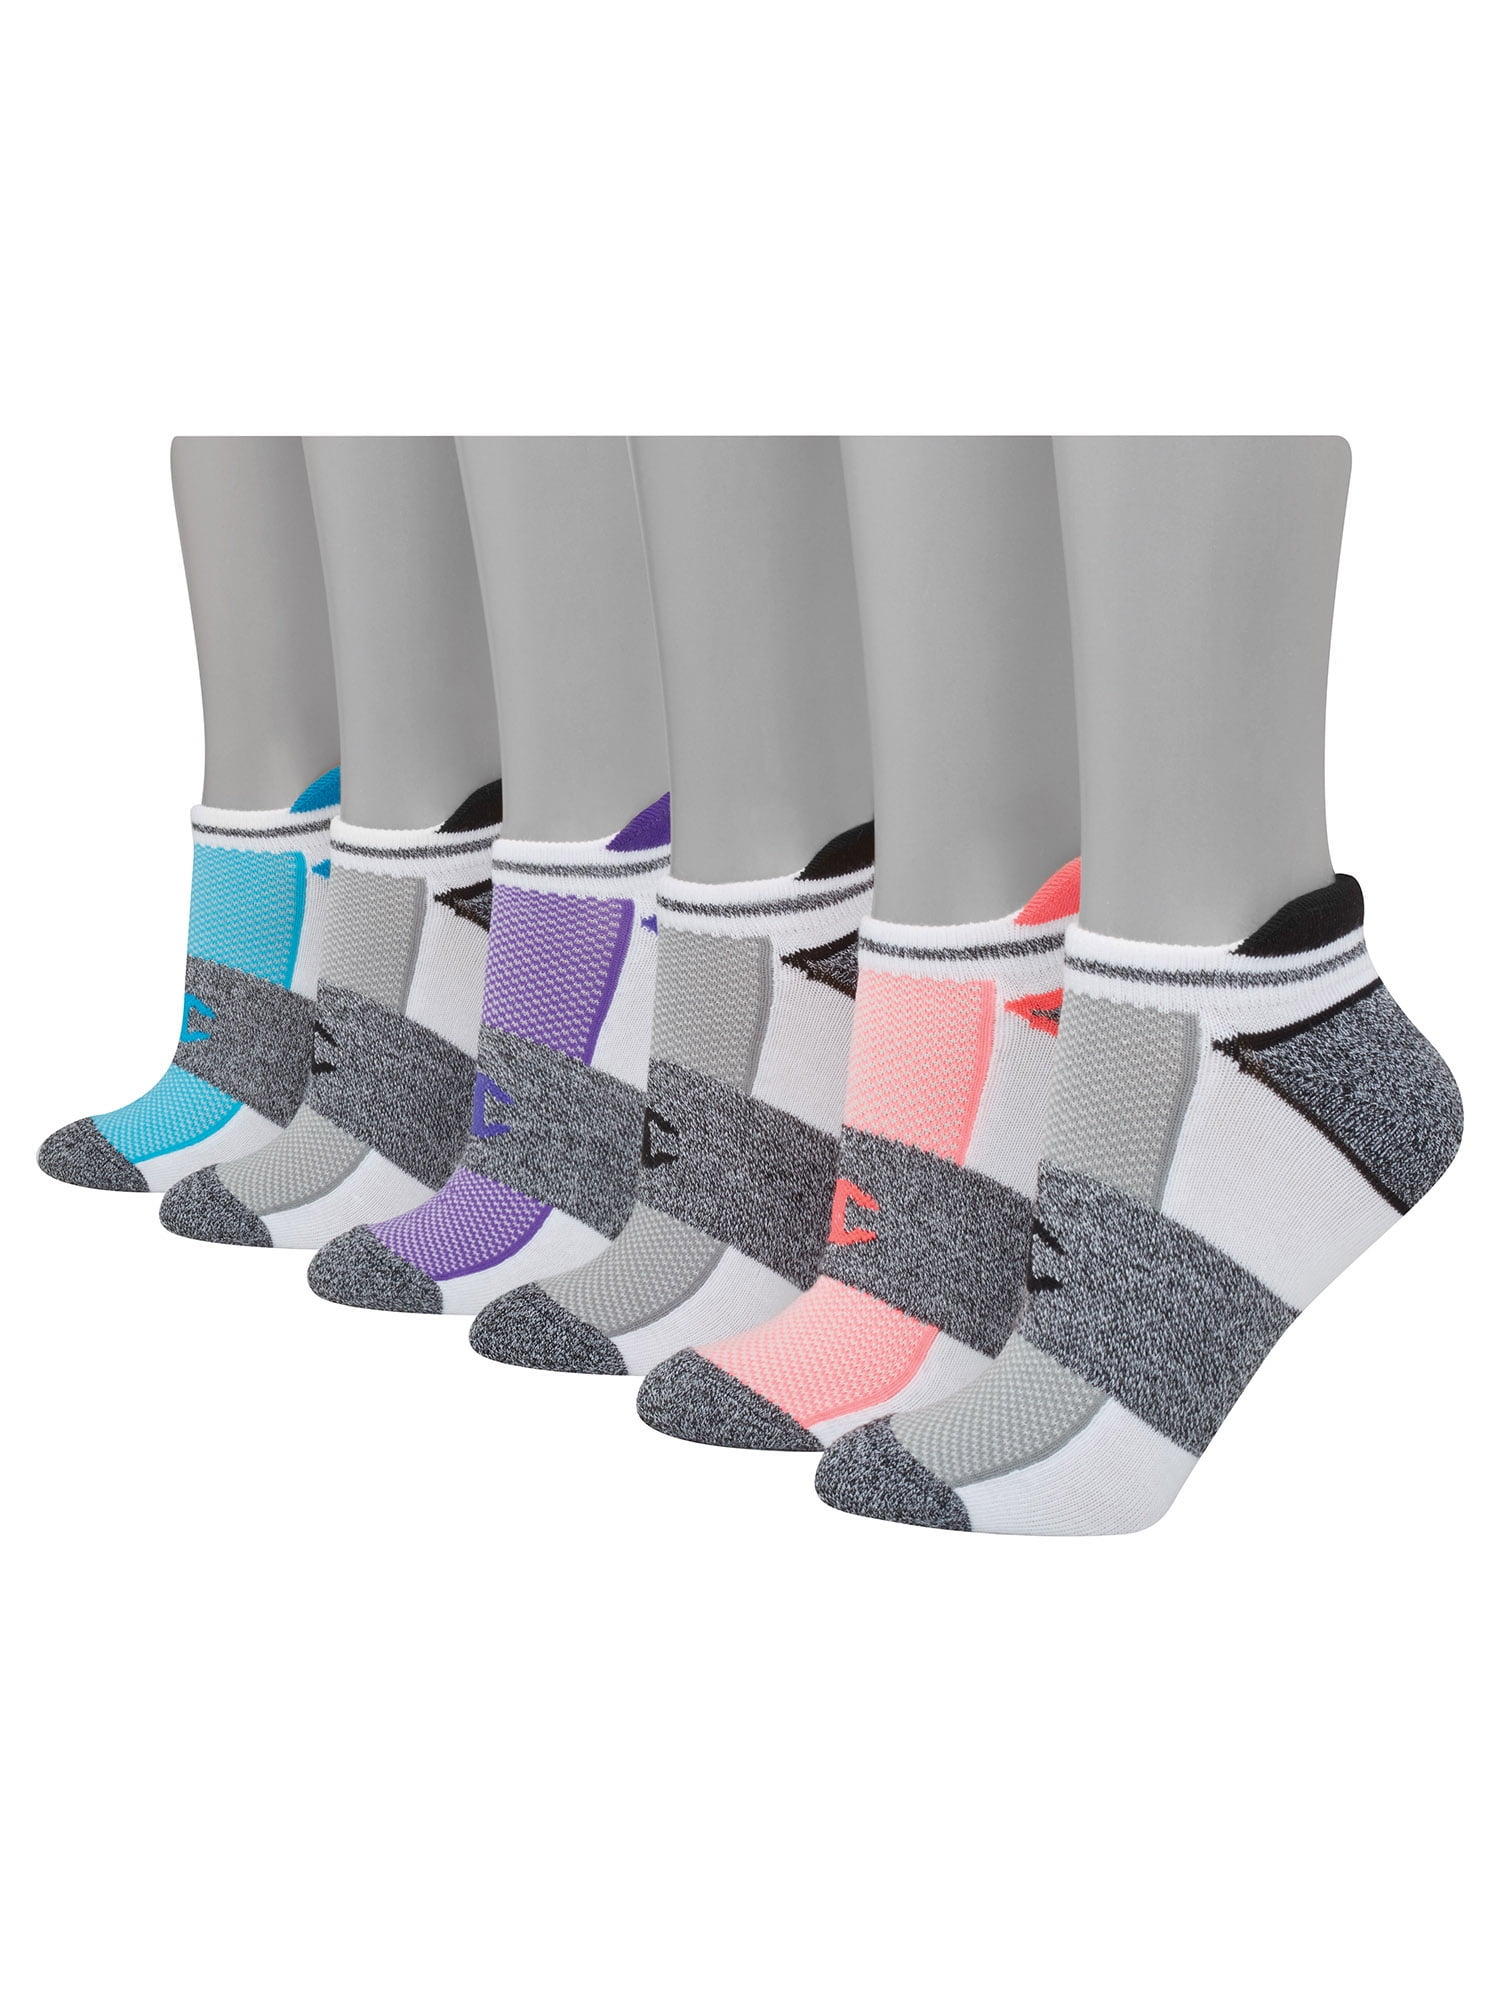 Champion Women's Performance Double Dry Ankle Sock, 6 Pack - Walmart.com